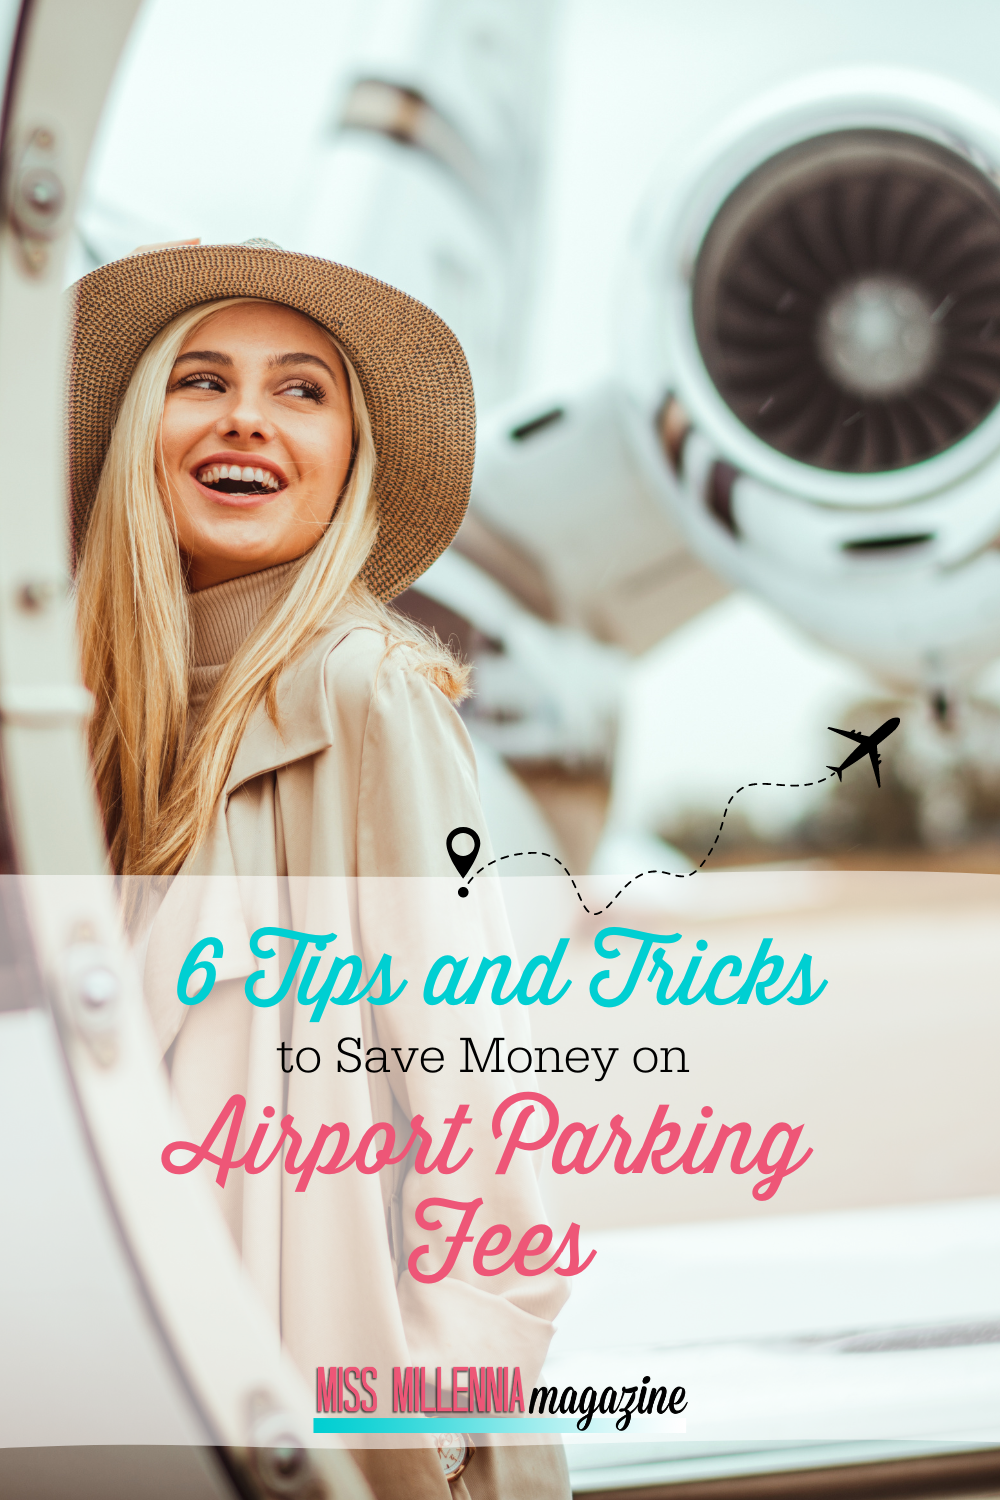 6 Tips and Tricks to Save Money on Airport Parking Fees